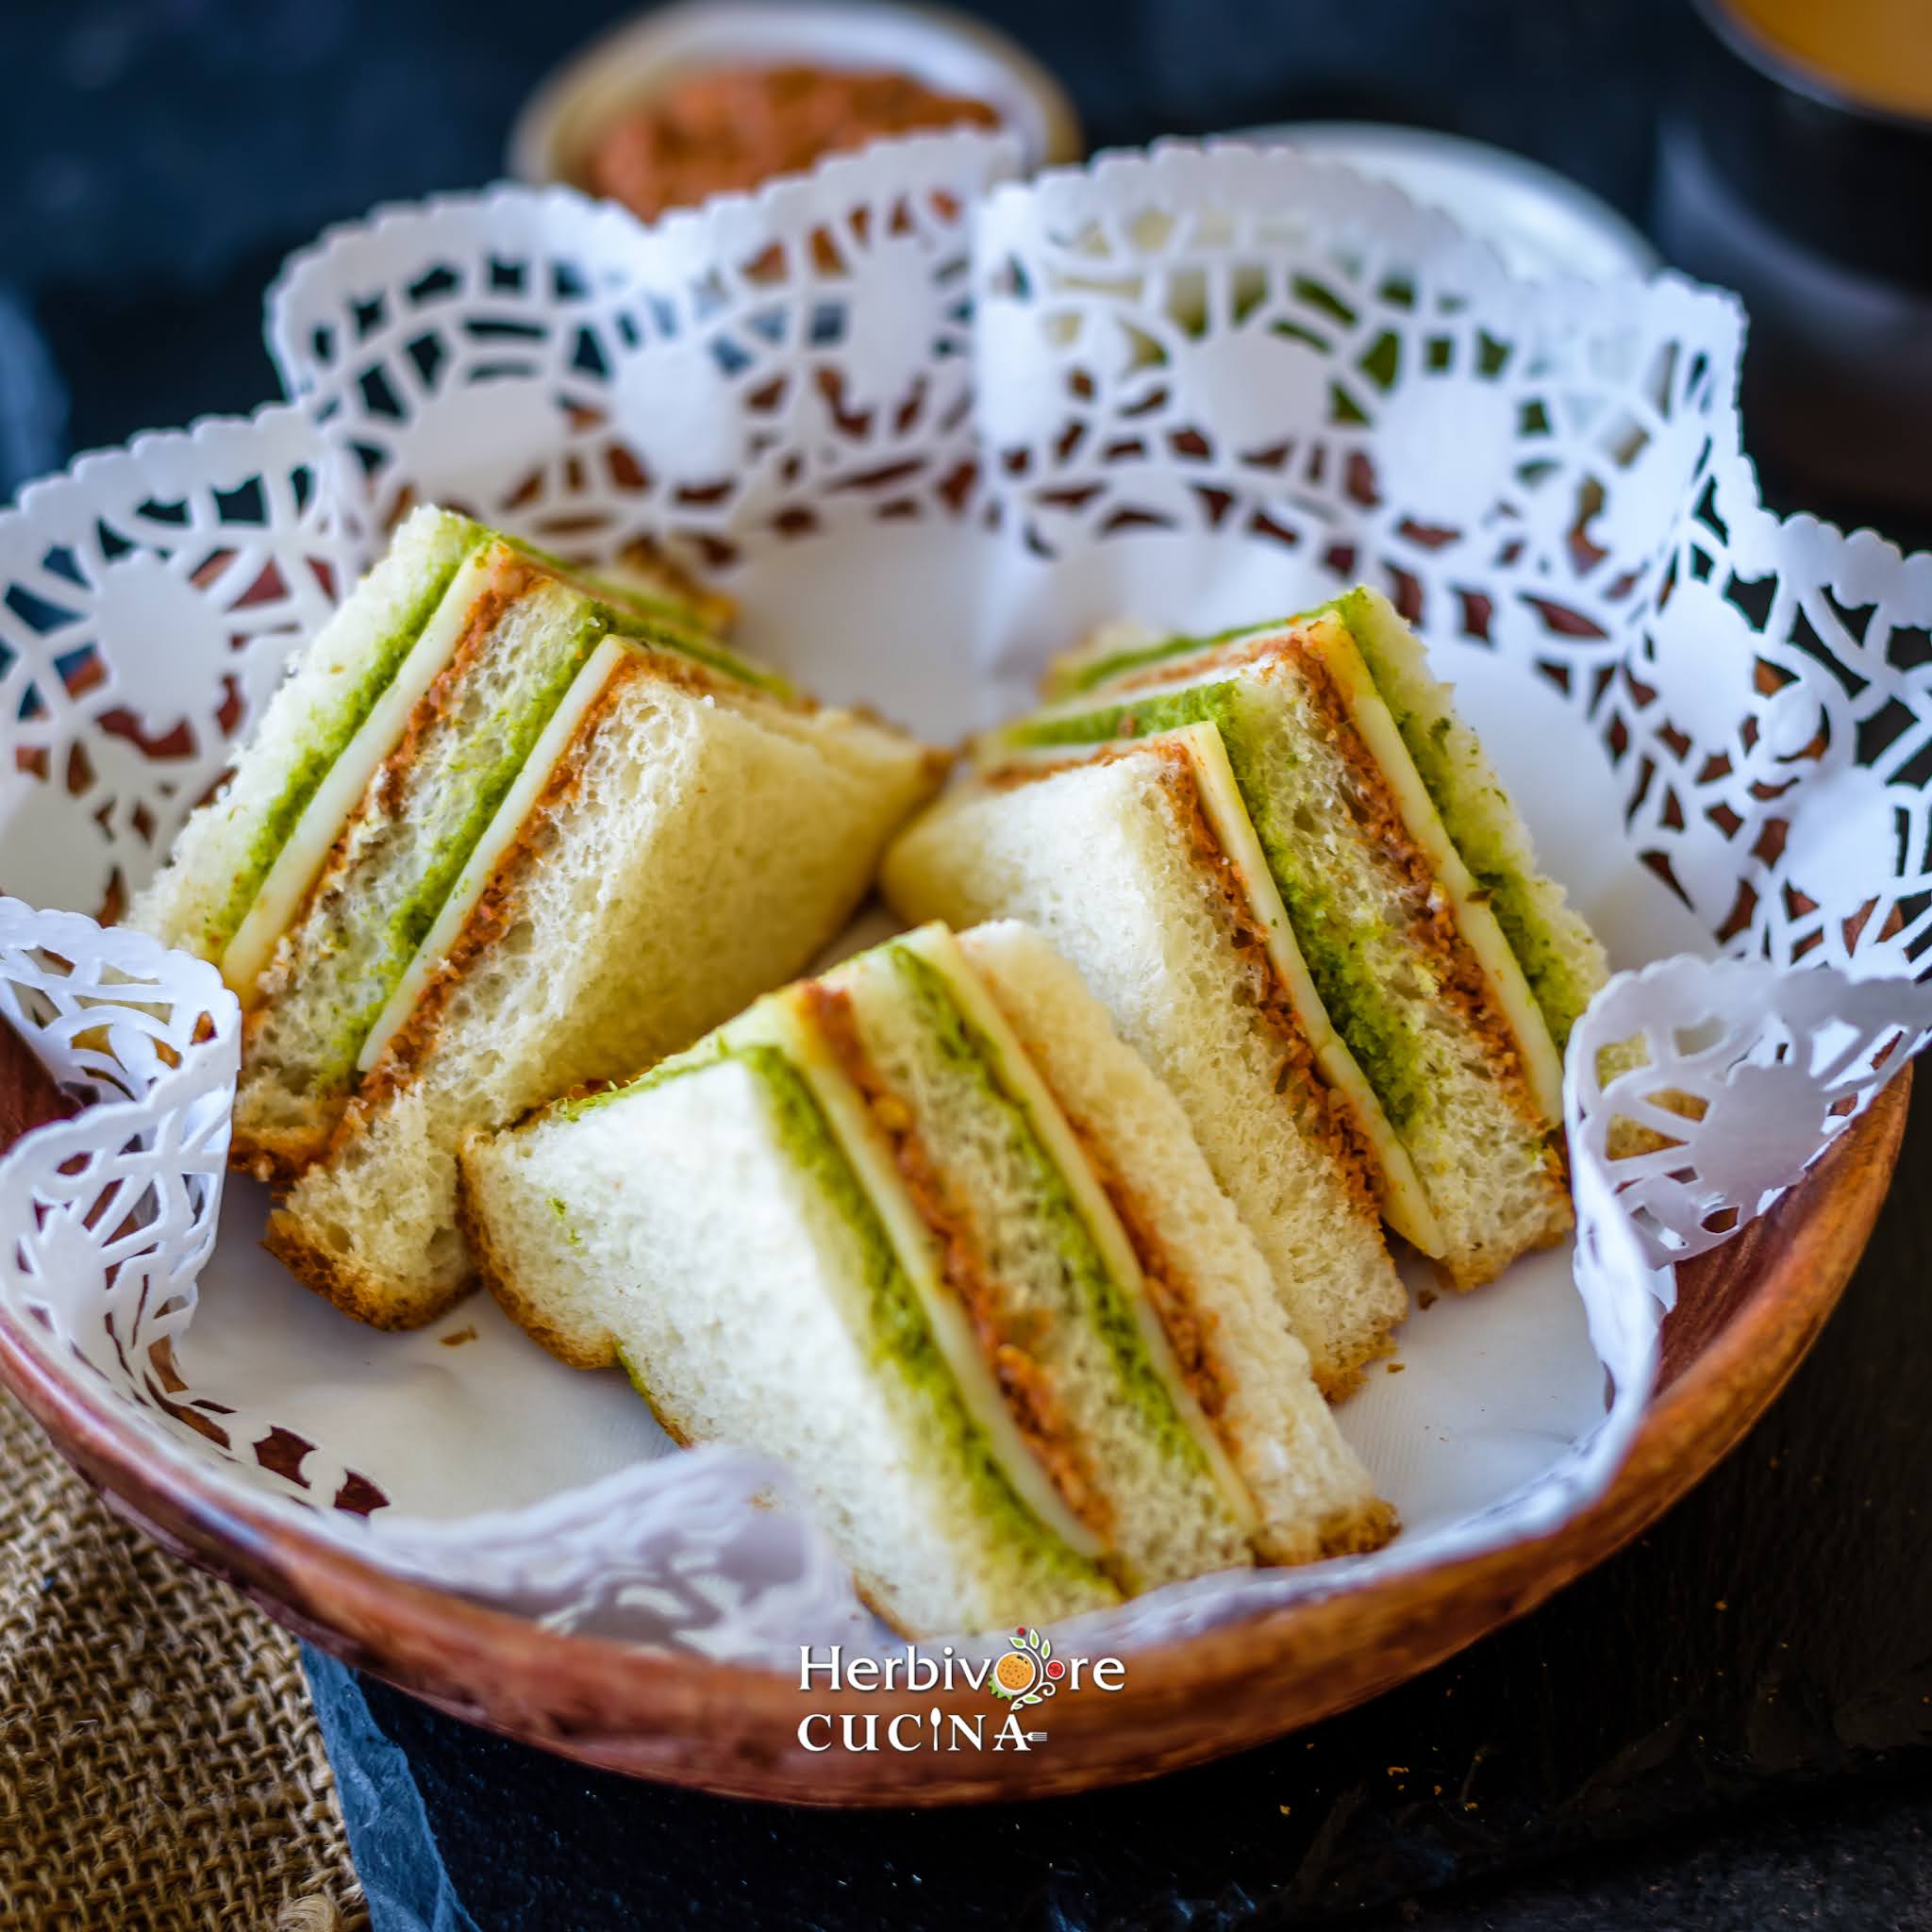 Three tricolor sandwich slices placed on a tea doily and served in a wooden plate.  